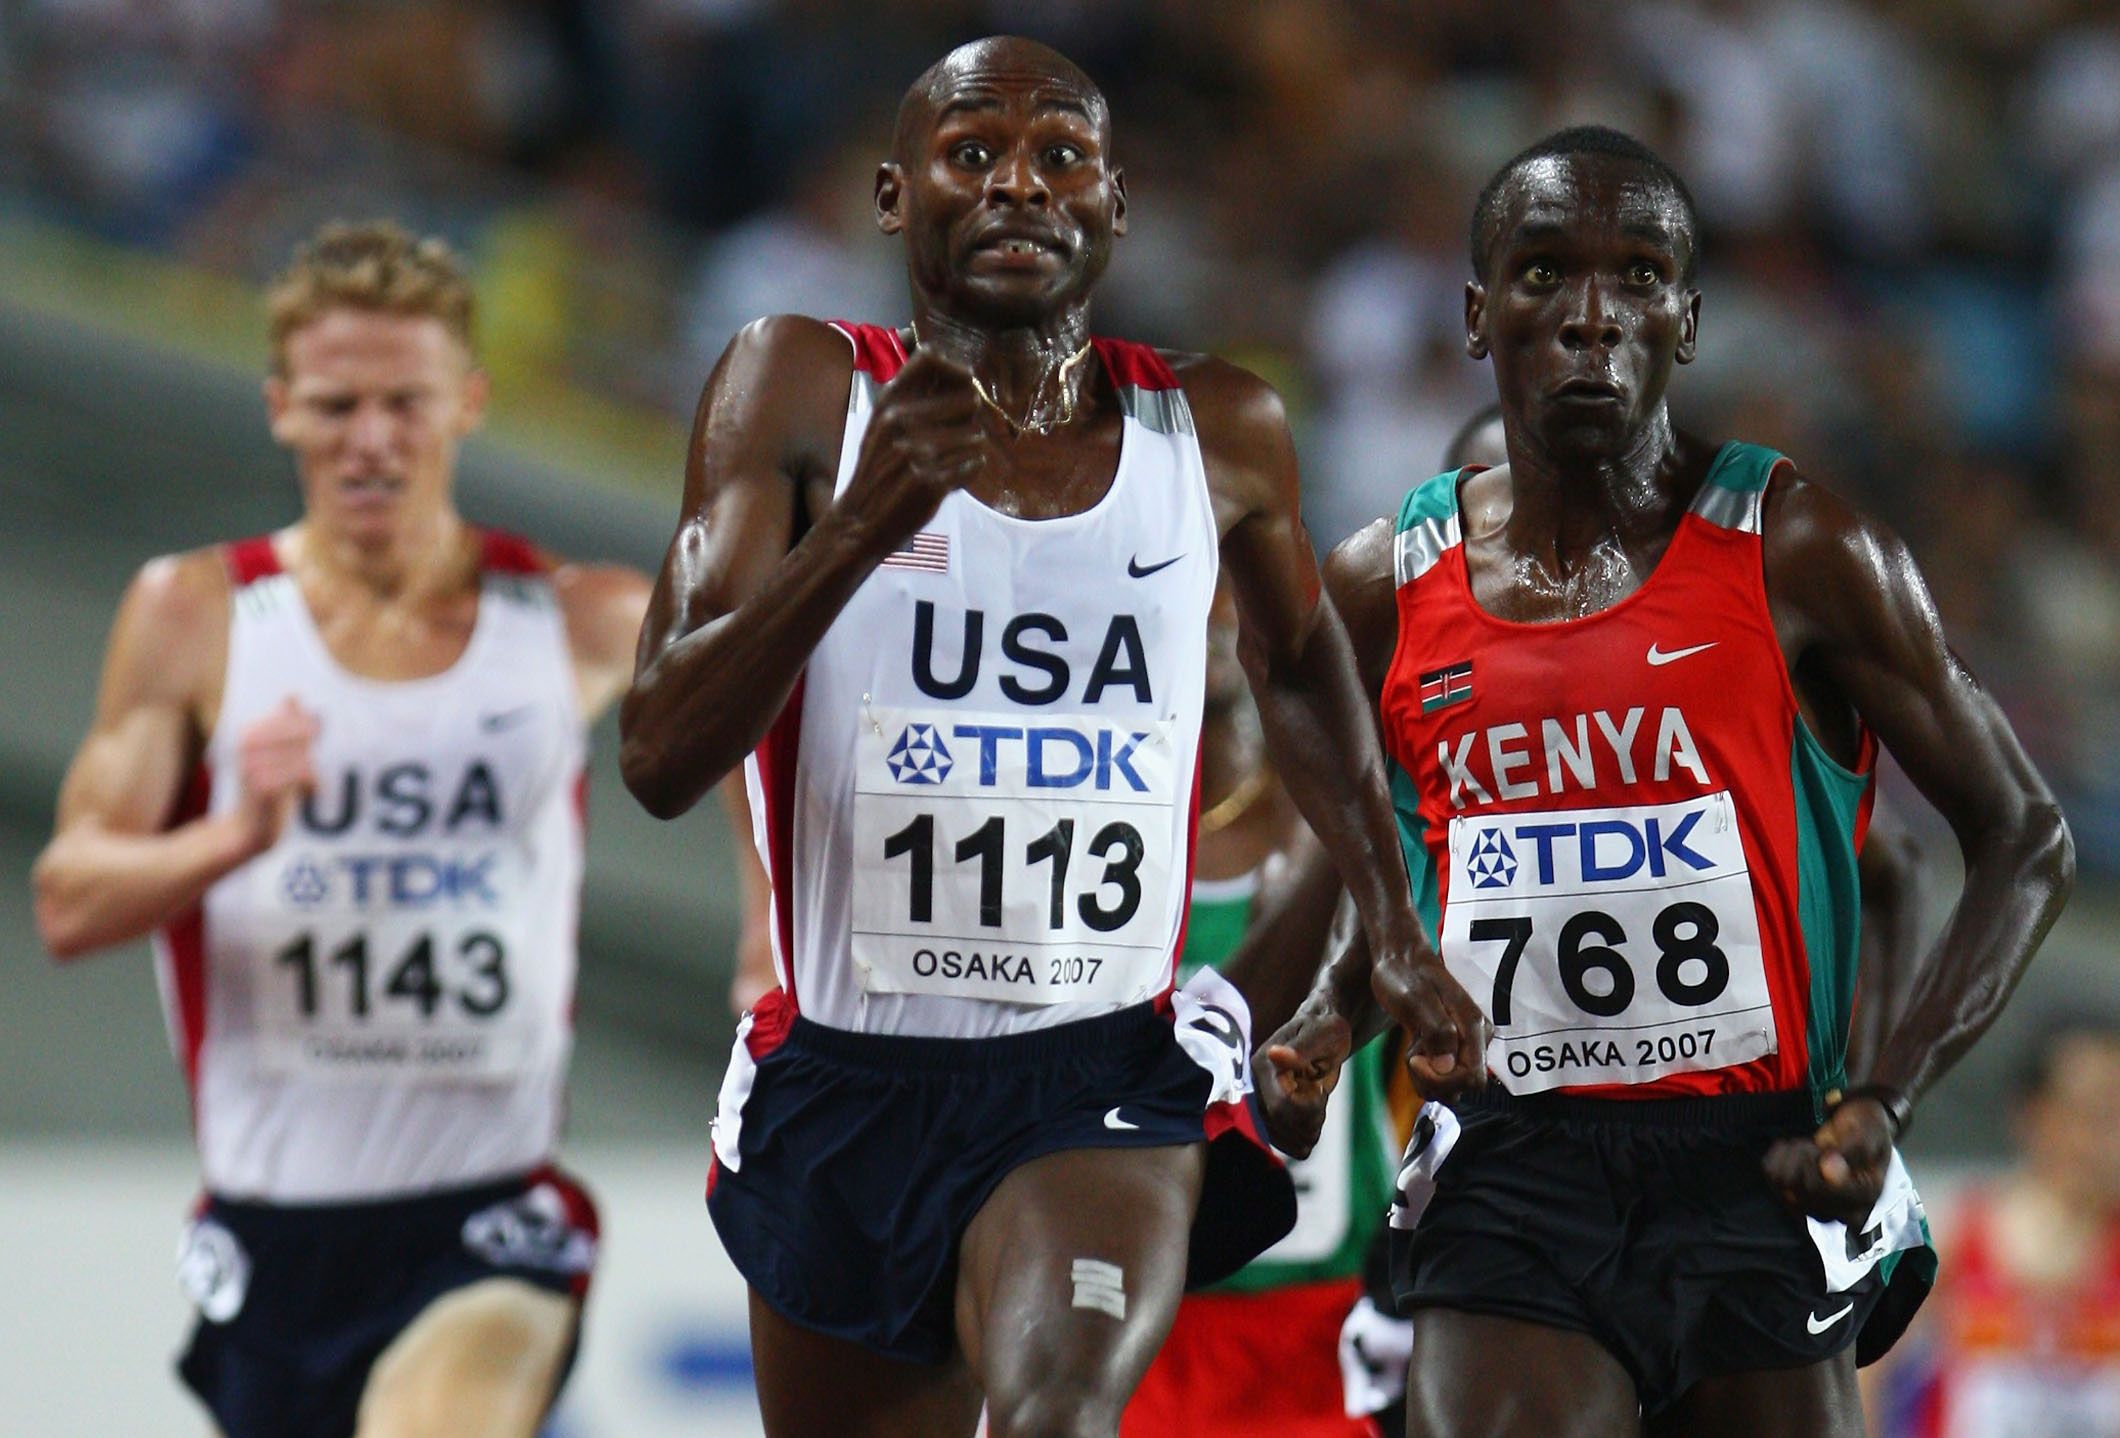 Bernard Lagat on his way to the world 5000m title in 2007